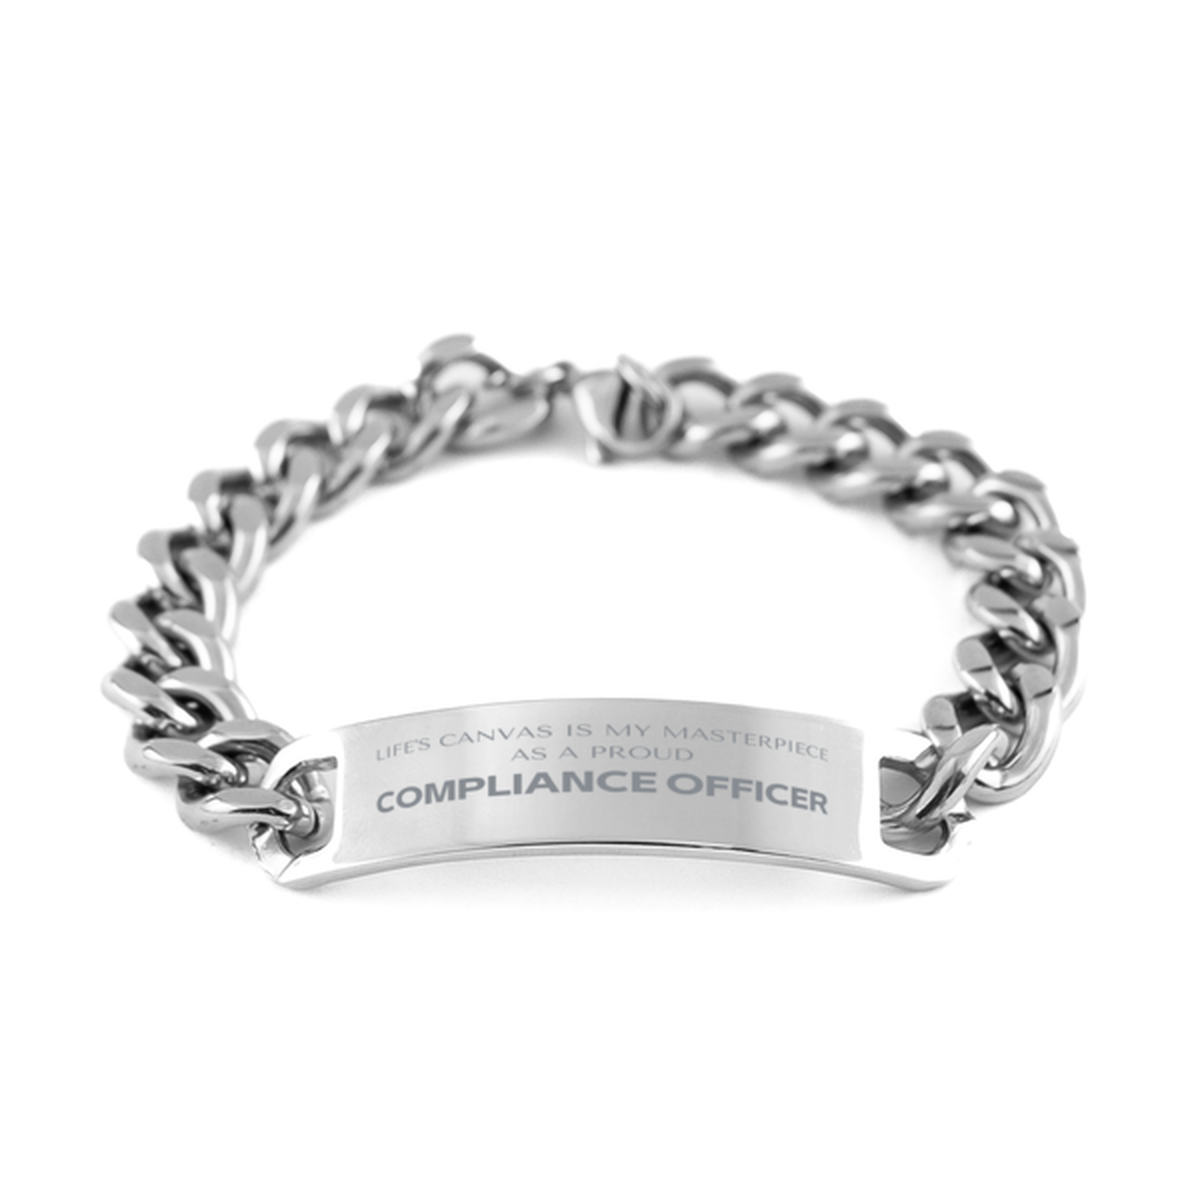 Proud Compliance Officer Gifts, Life's canvas is my masterpiece, Epic Birthday Christmas Unique Cuban Chain Stainless Steel Bracelet For Compliance Officer, Coworkers, Men, Women, Friends